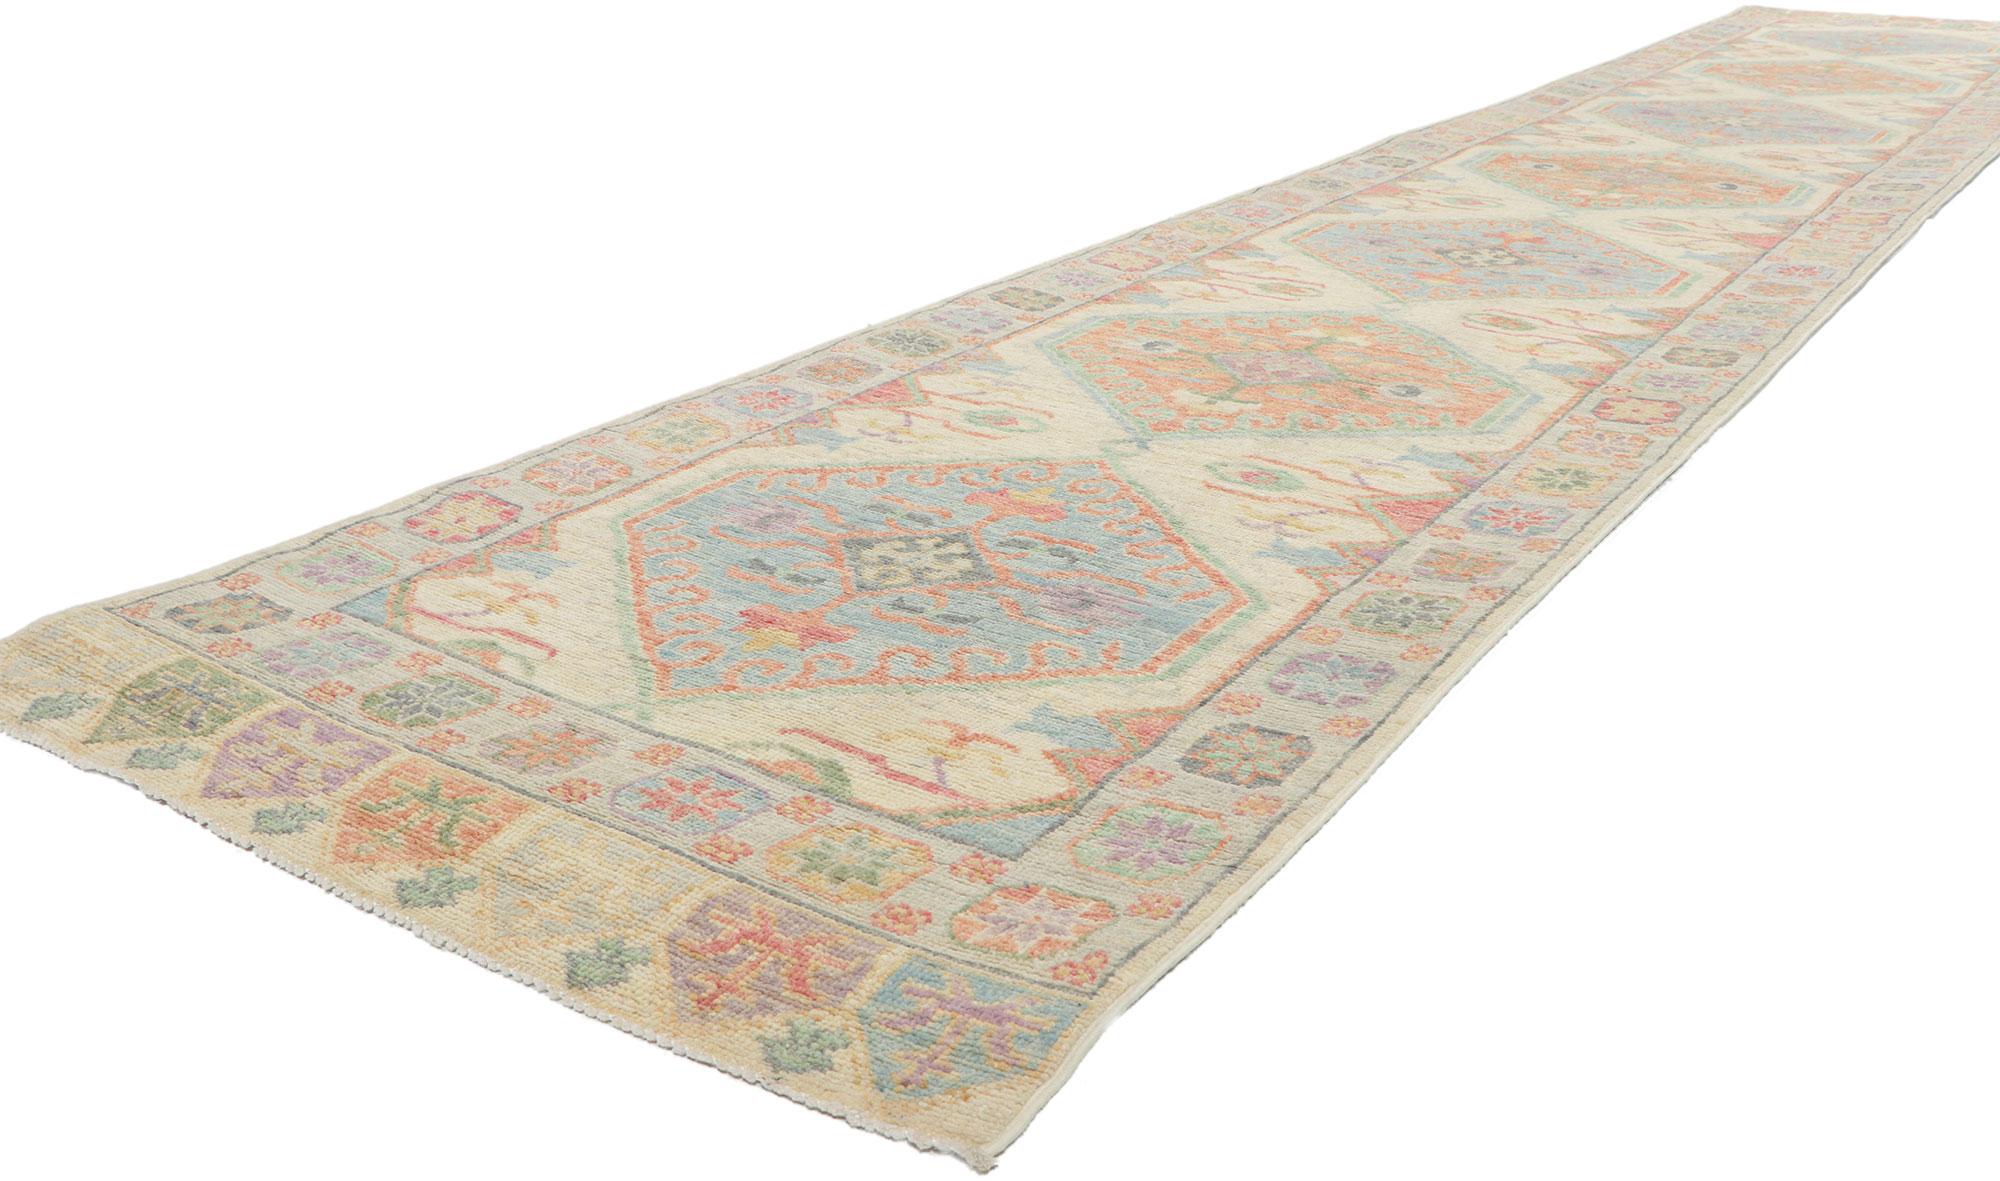 80881 New Colorful Oushak Runner with Modern Style 02'11 x 16'07.
Polished and playful with a hint of nomadic charm, this hand-knotted wool contemporary Oushak runner beautifully embodies a modern style. The abrashed field features hooked medallions